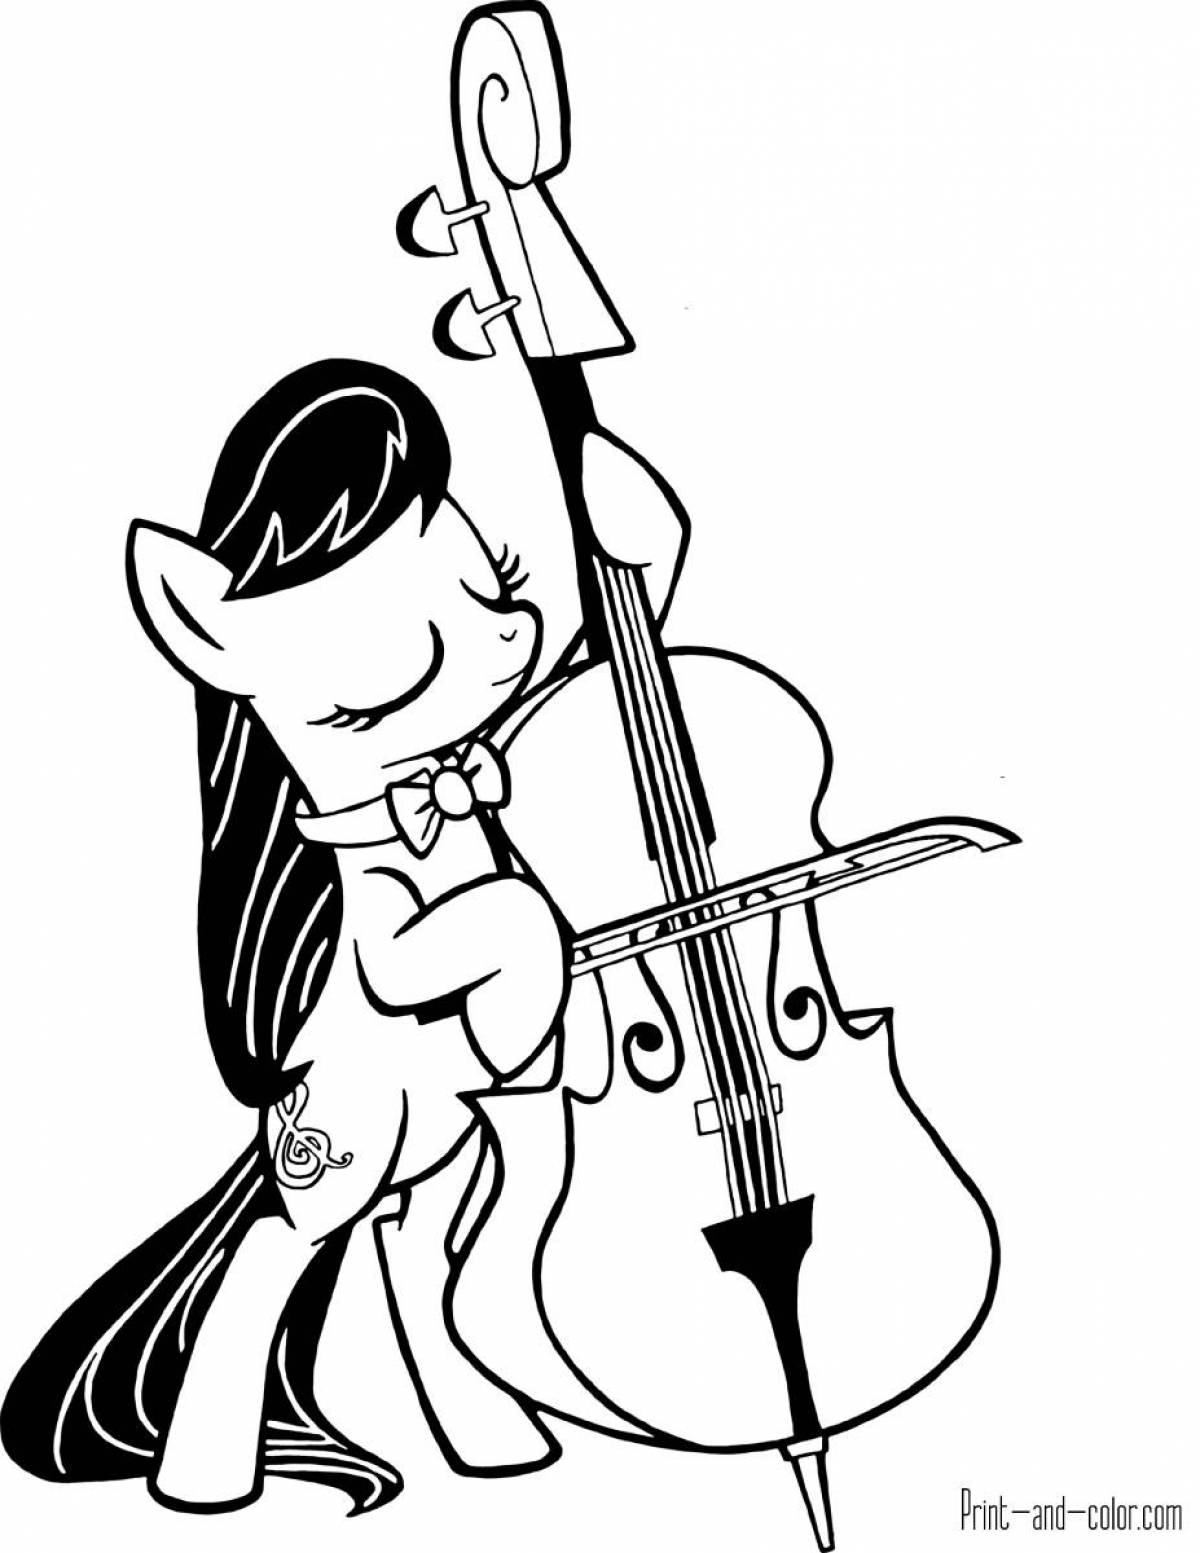 Glorious pony coloring page